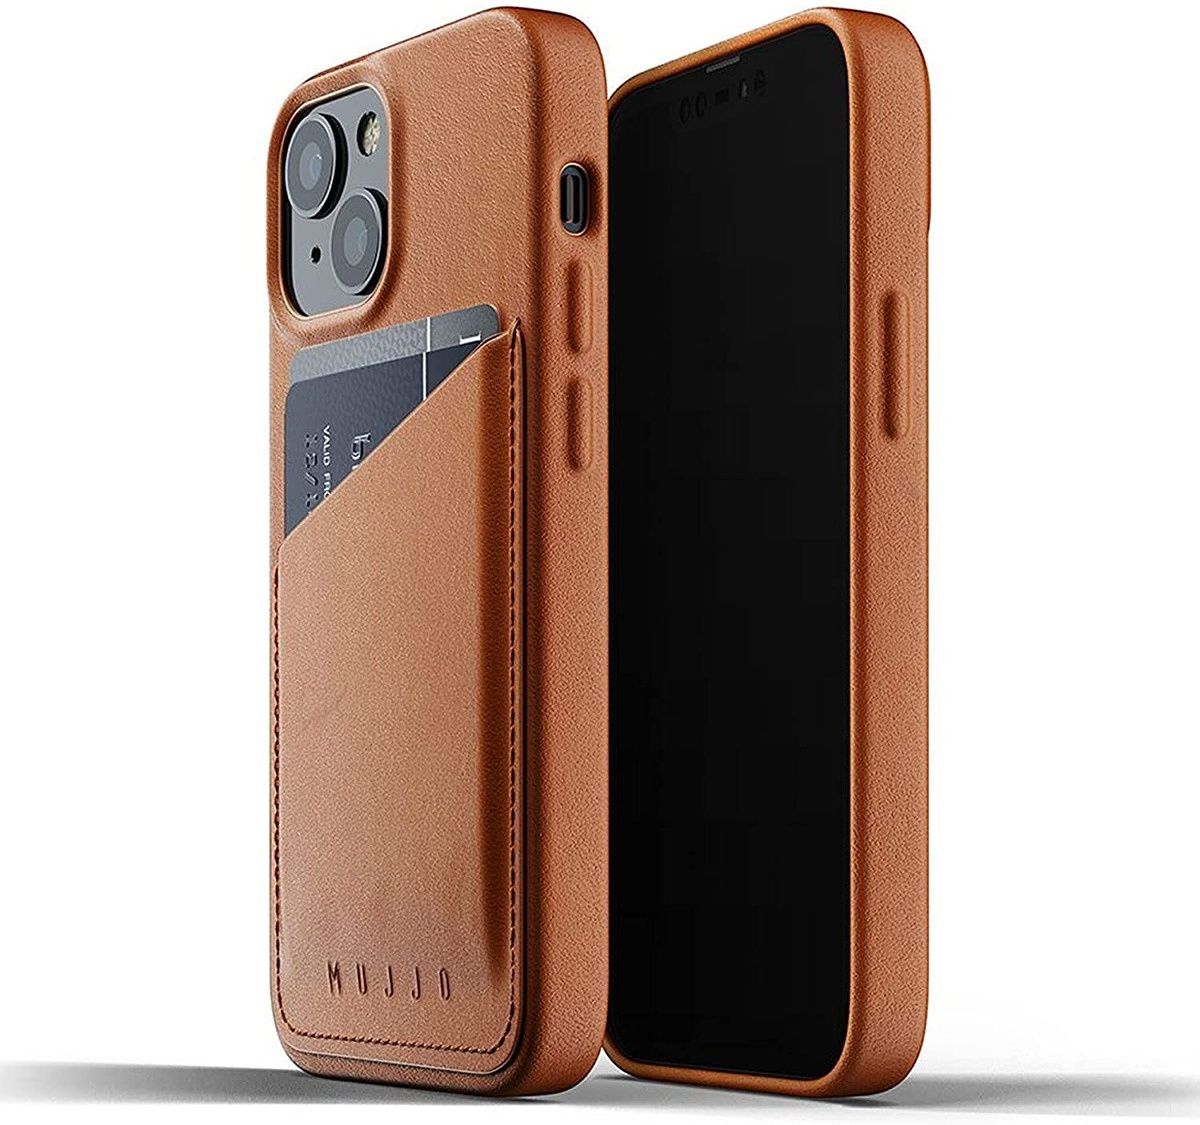 This is an elegant case from Mujjo that has a slot at the back for a couple of credit cards. If you want a high-quality case that looks classy and can even hold some cards, you can surely pick up this case.